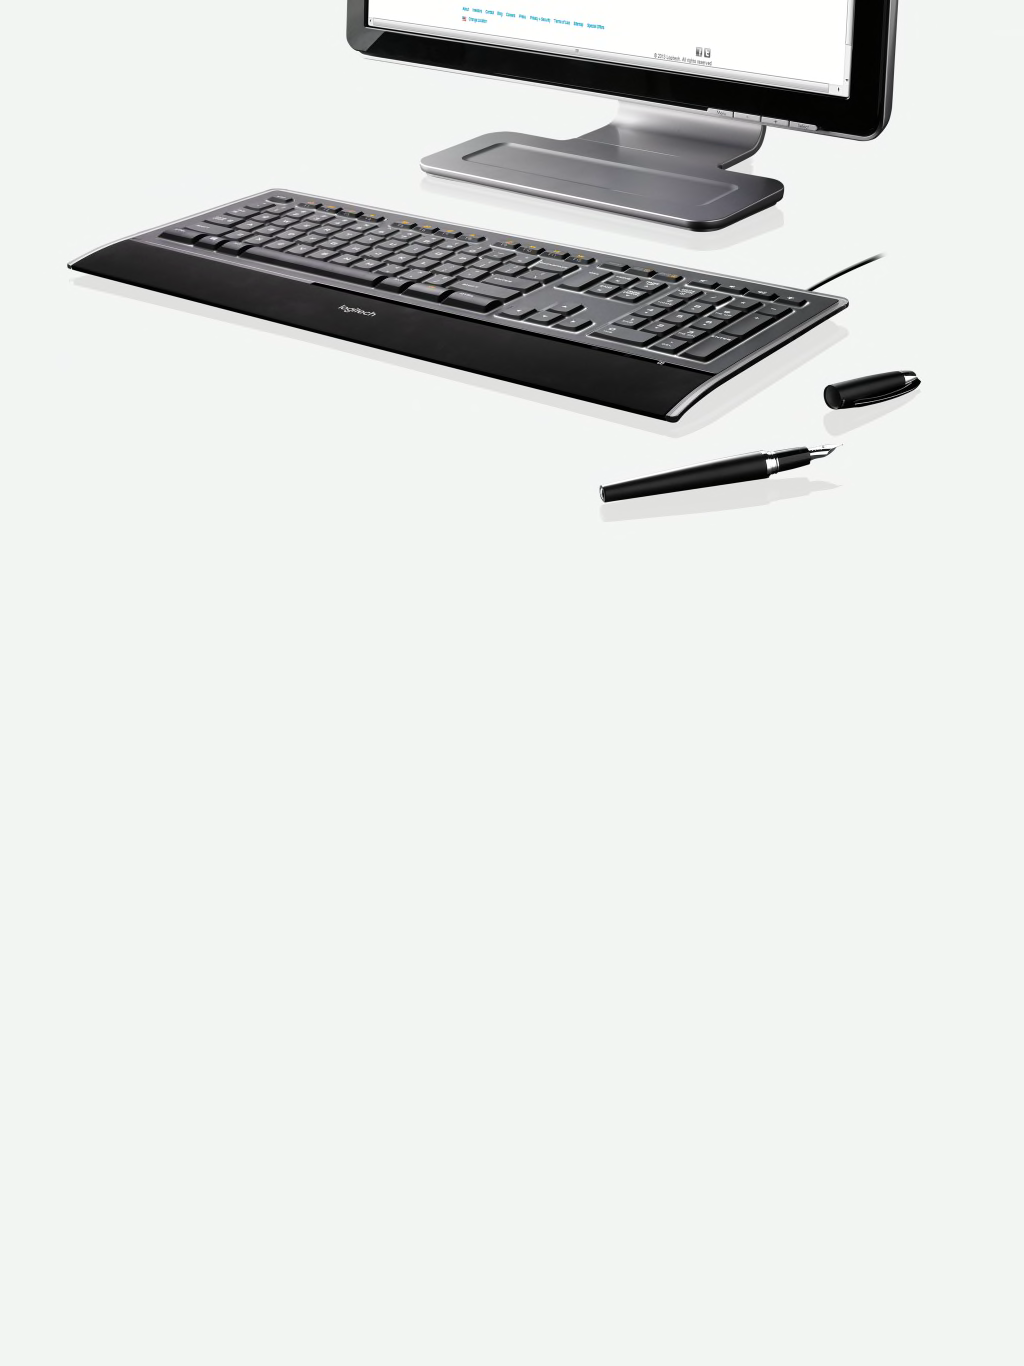 k740-feature-06-tablet